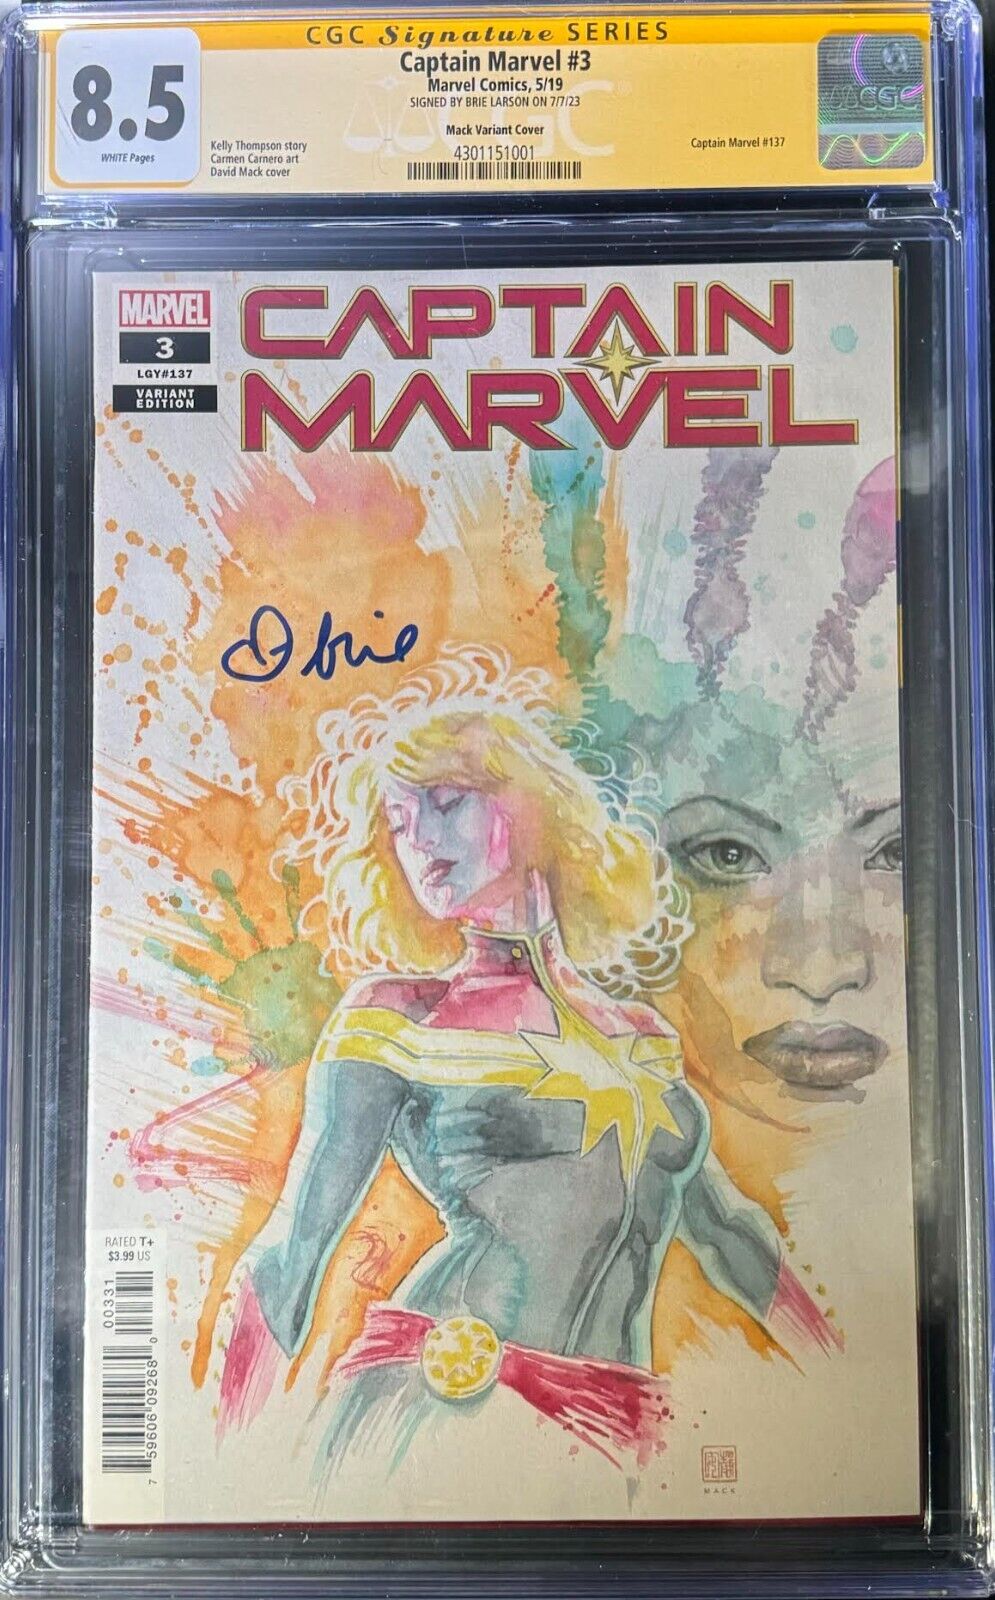 CGC SIGNATURE SERIES - SIGNED BY BRIE LARSON